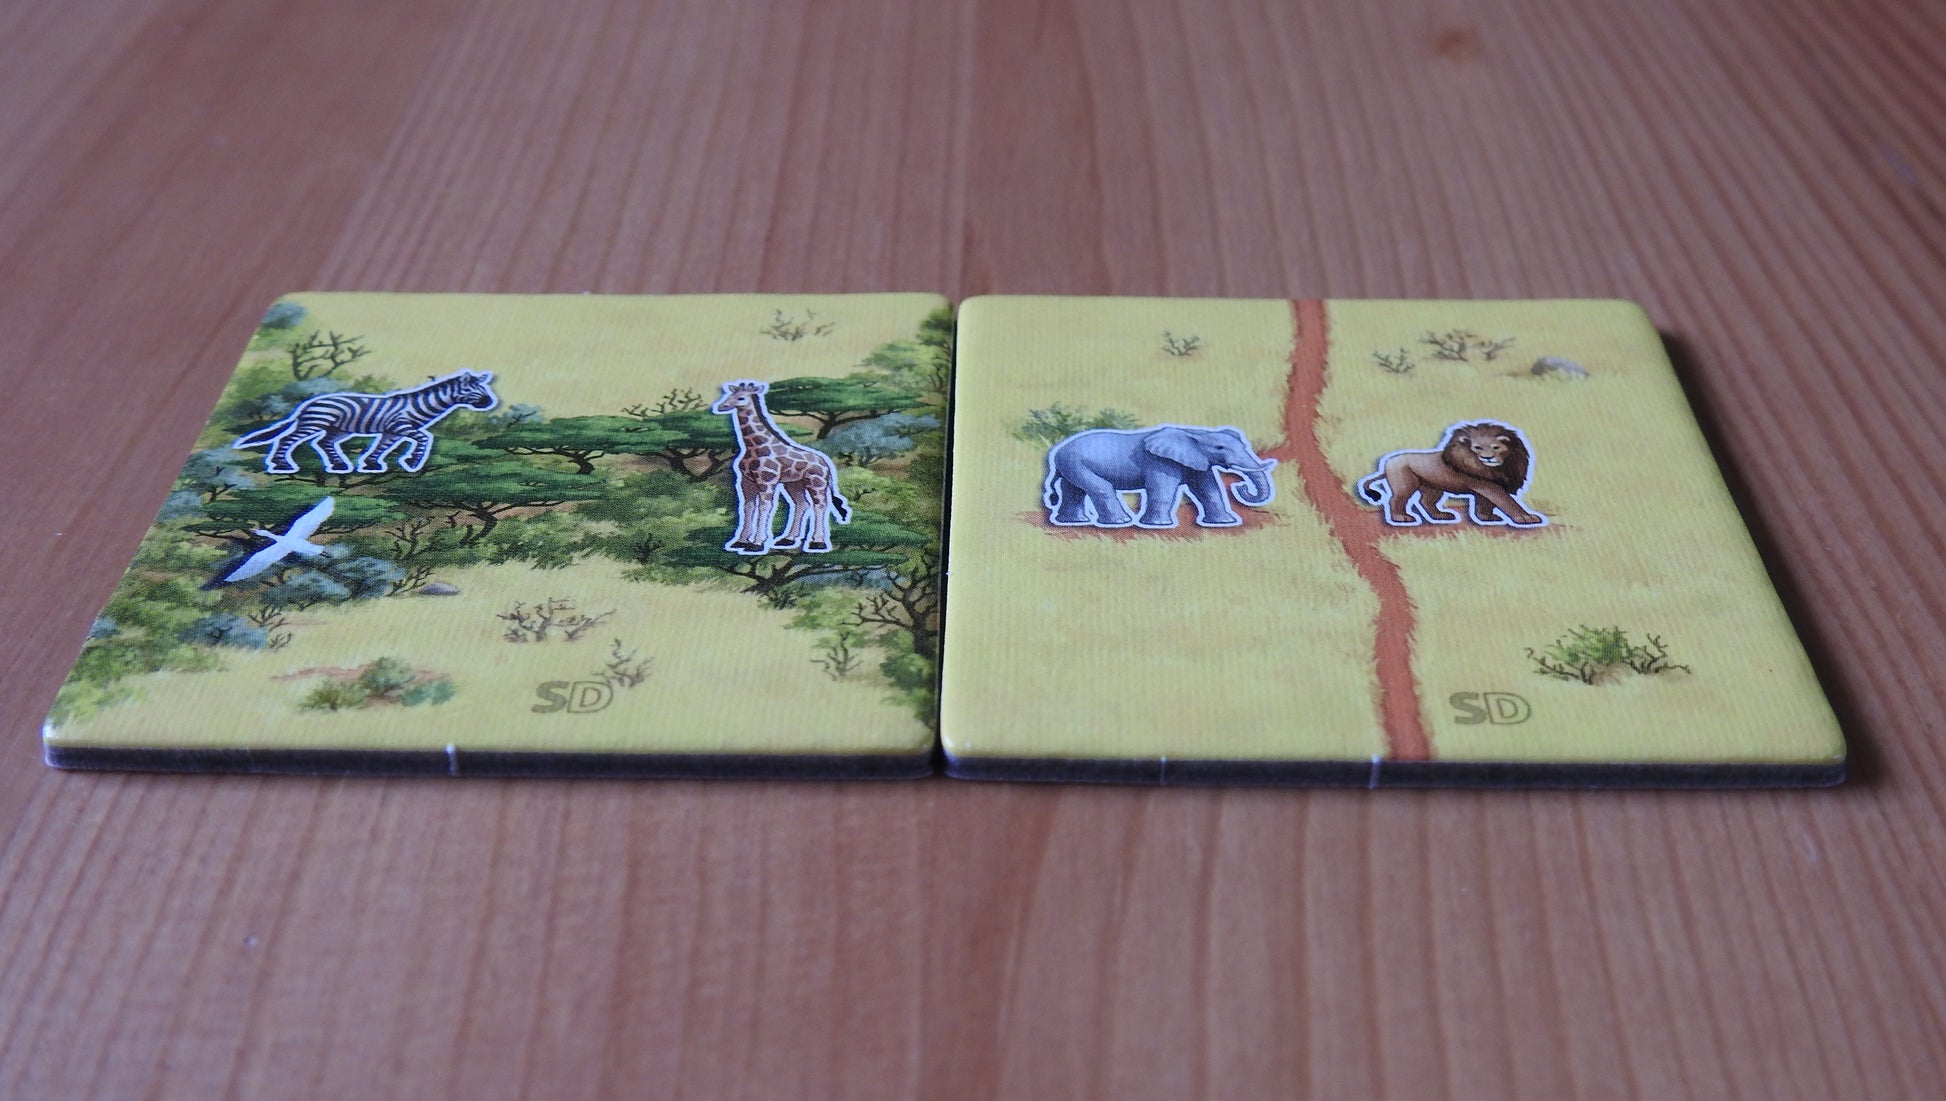 Another angle showing both tiles included with this Spiel Doch 2 Tile Promo.